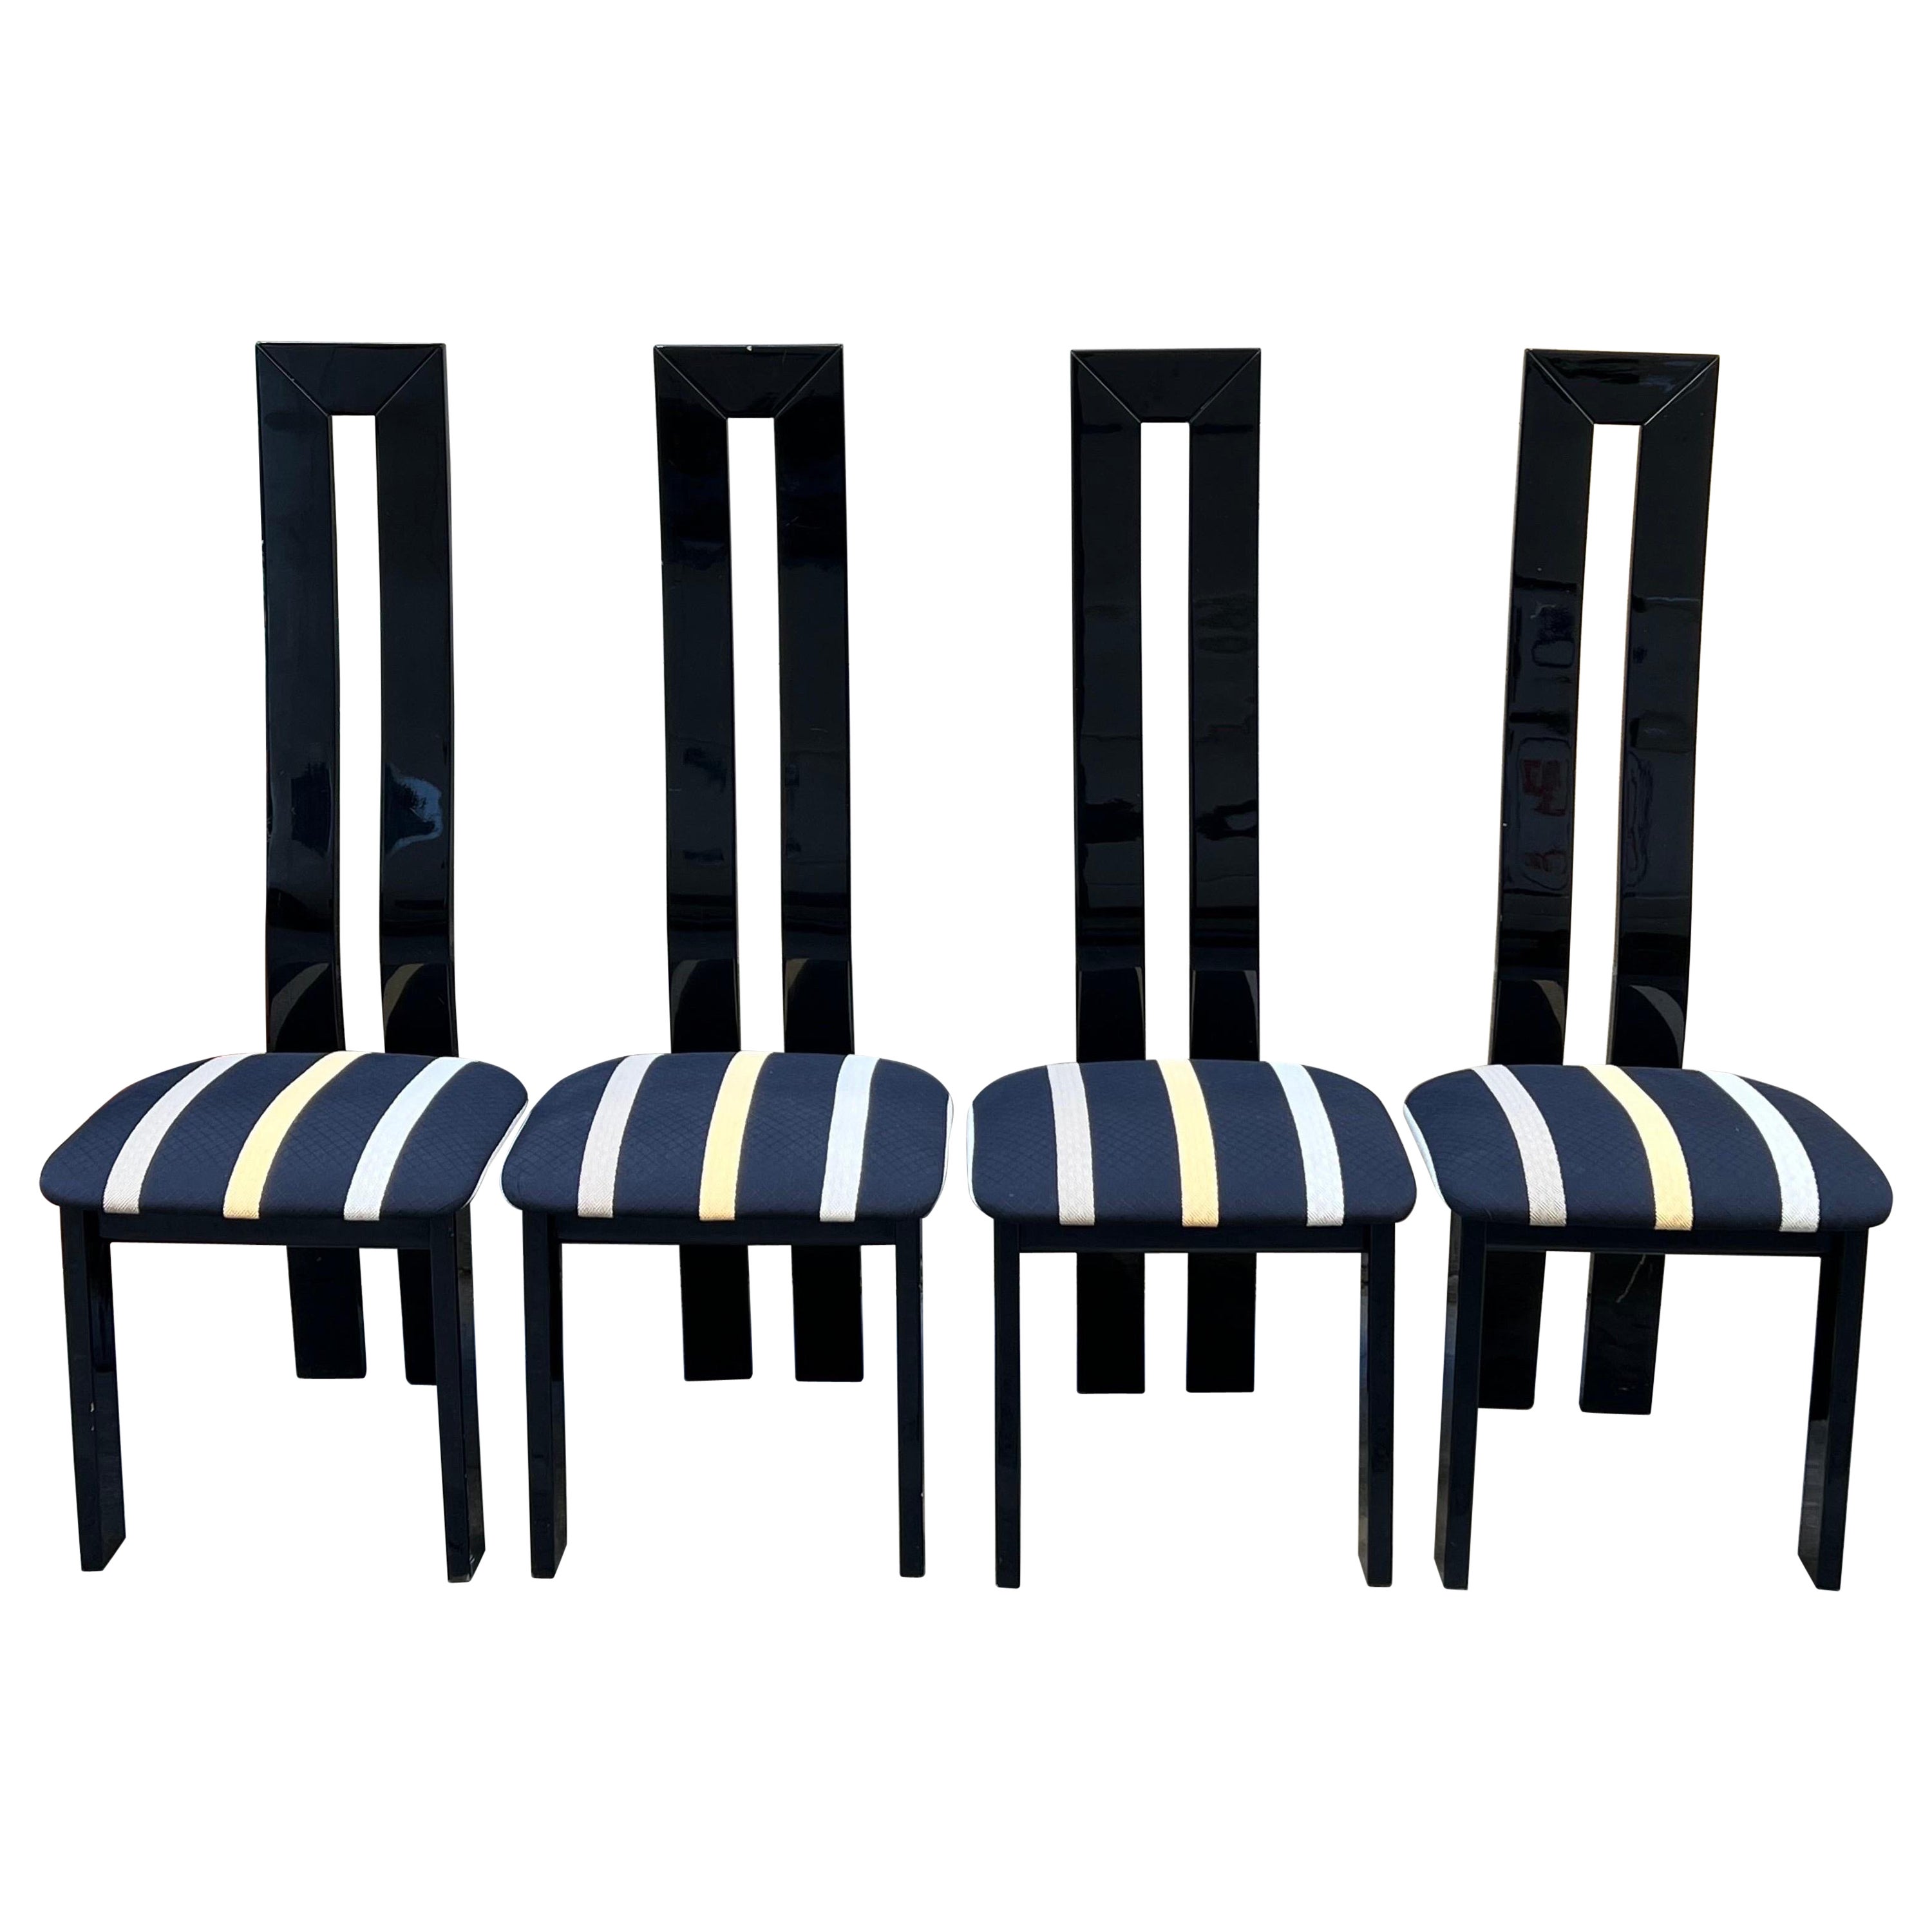 Set of 4 Italian Black Lacquered High Back Dining Chairs Striped Seat, 1970s